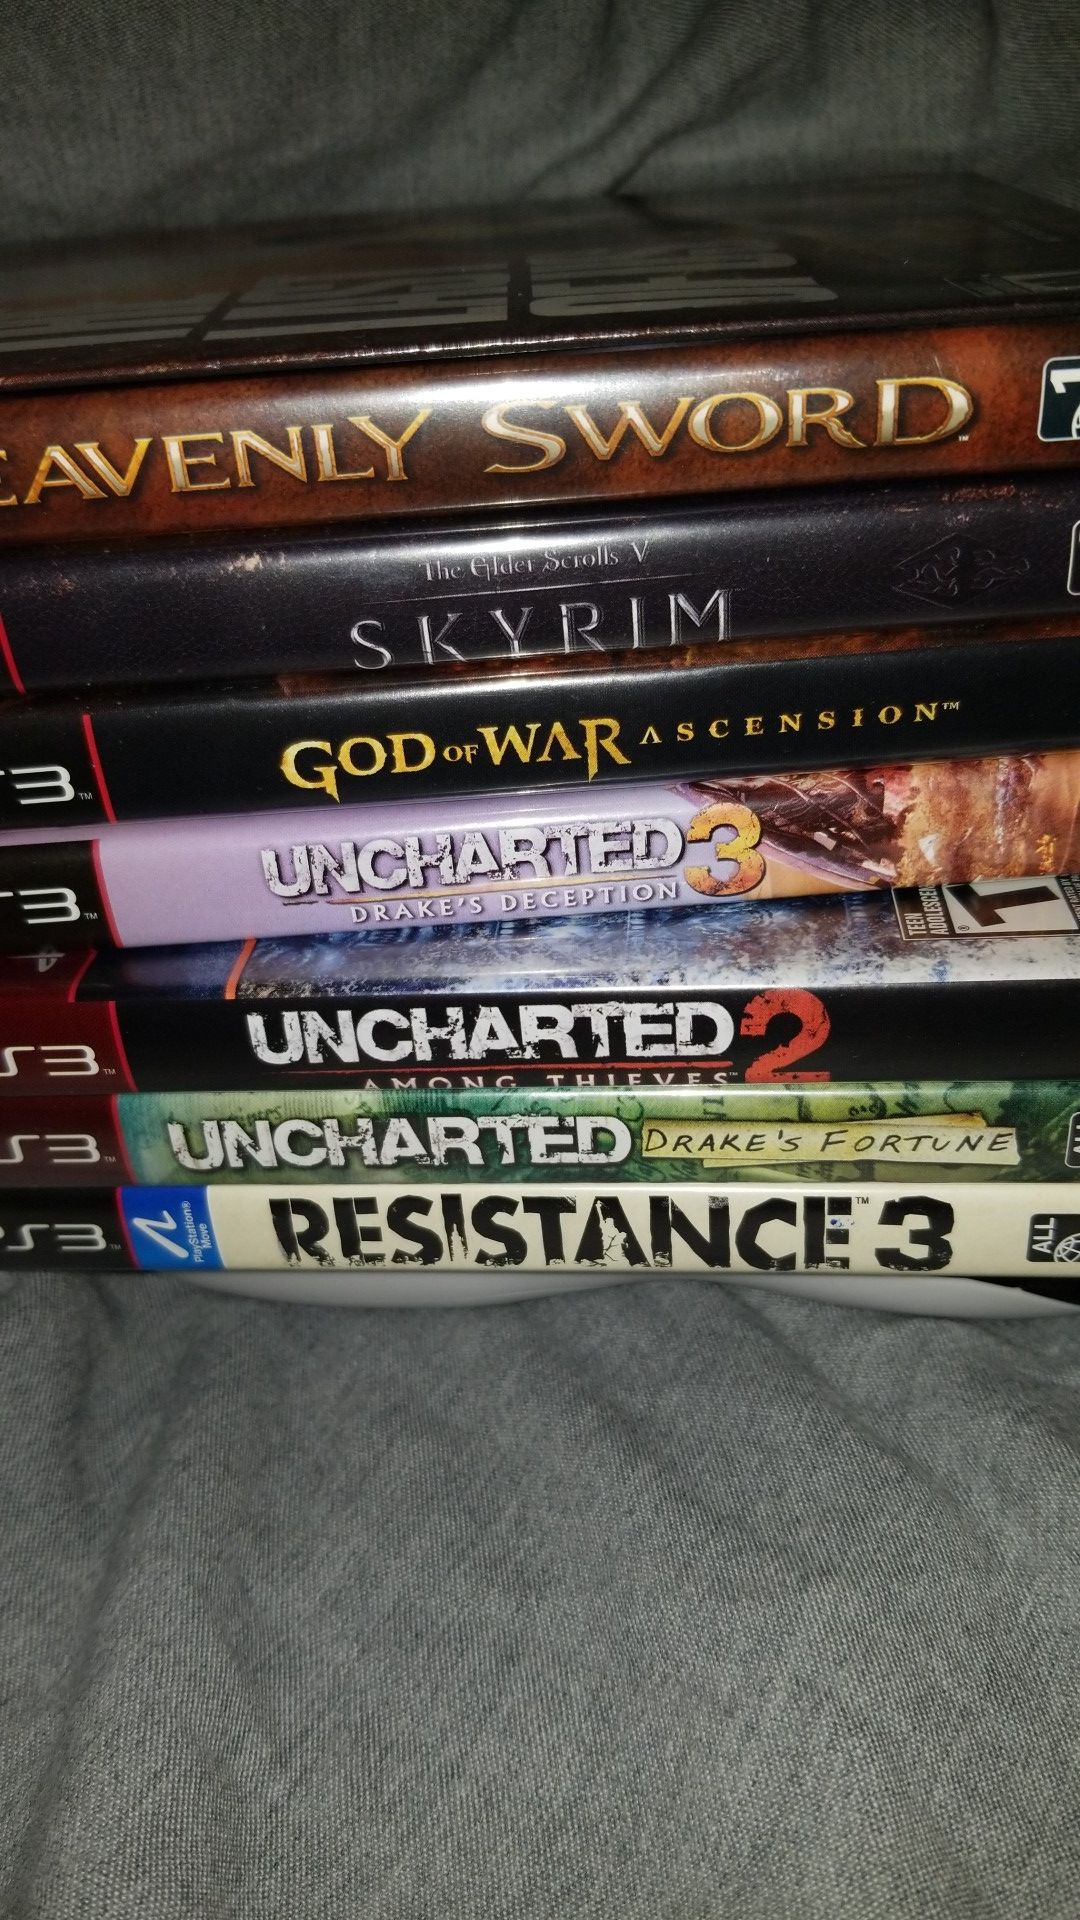 PS3 Games, includes a Collector's edition item